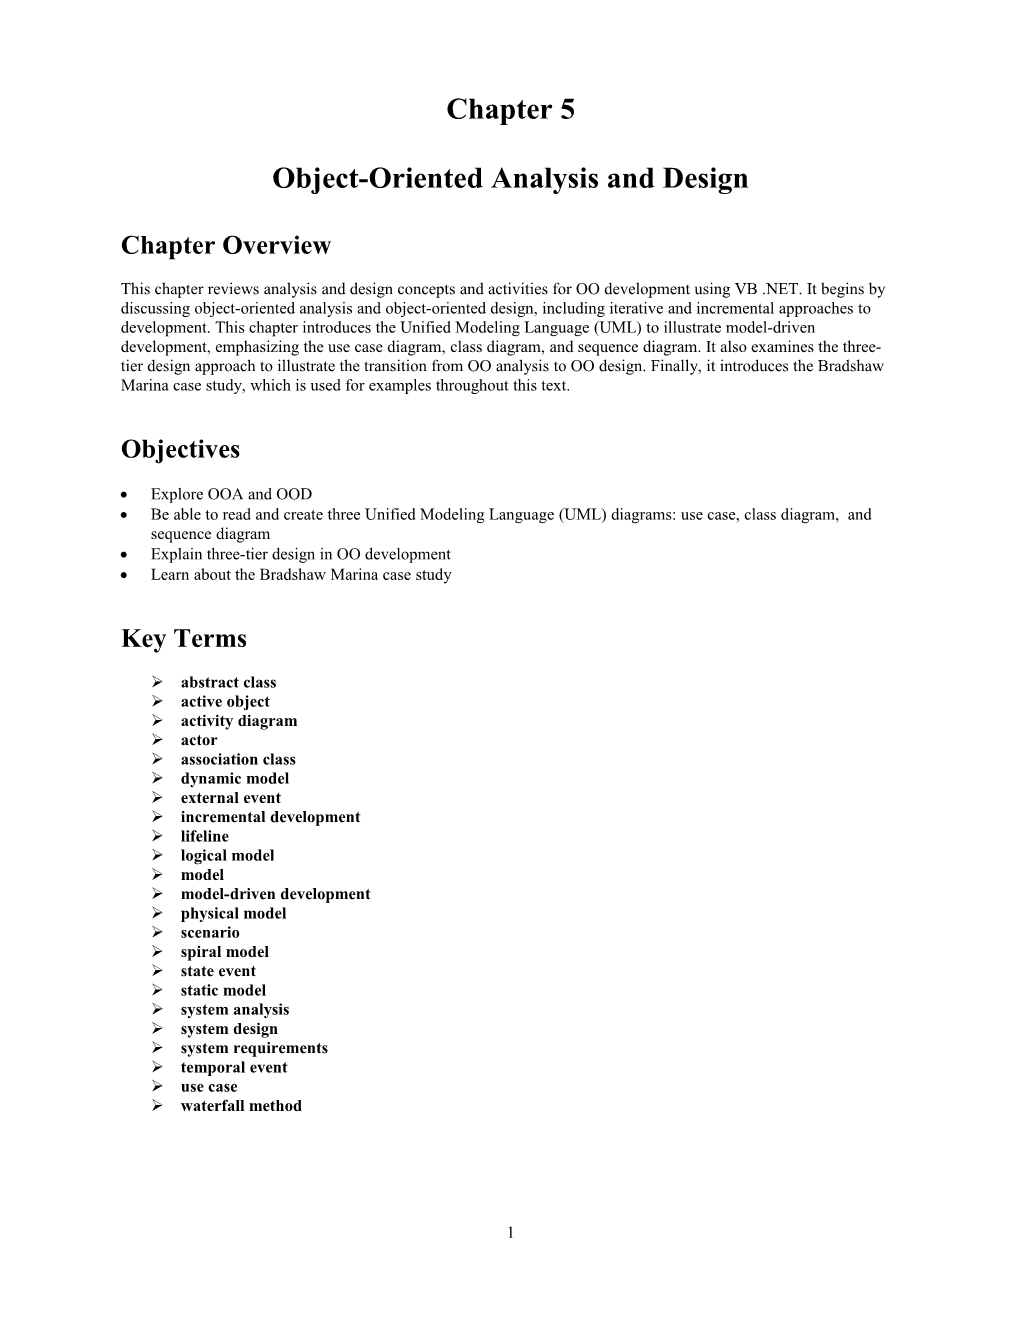 Object-Oriented Analysis and Design s1